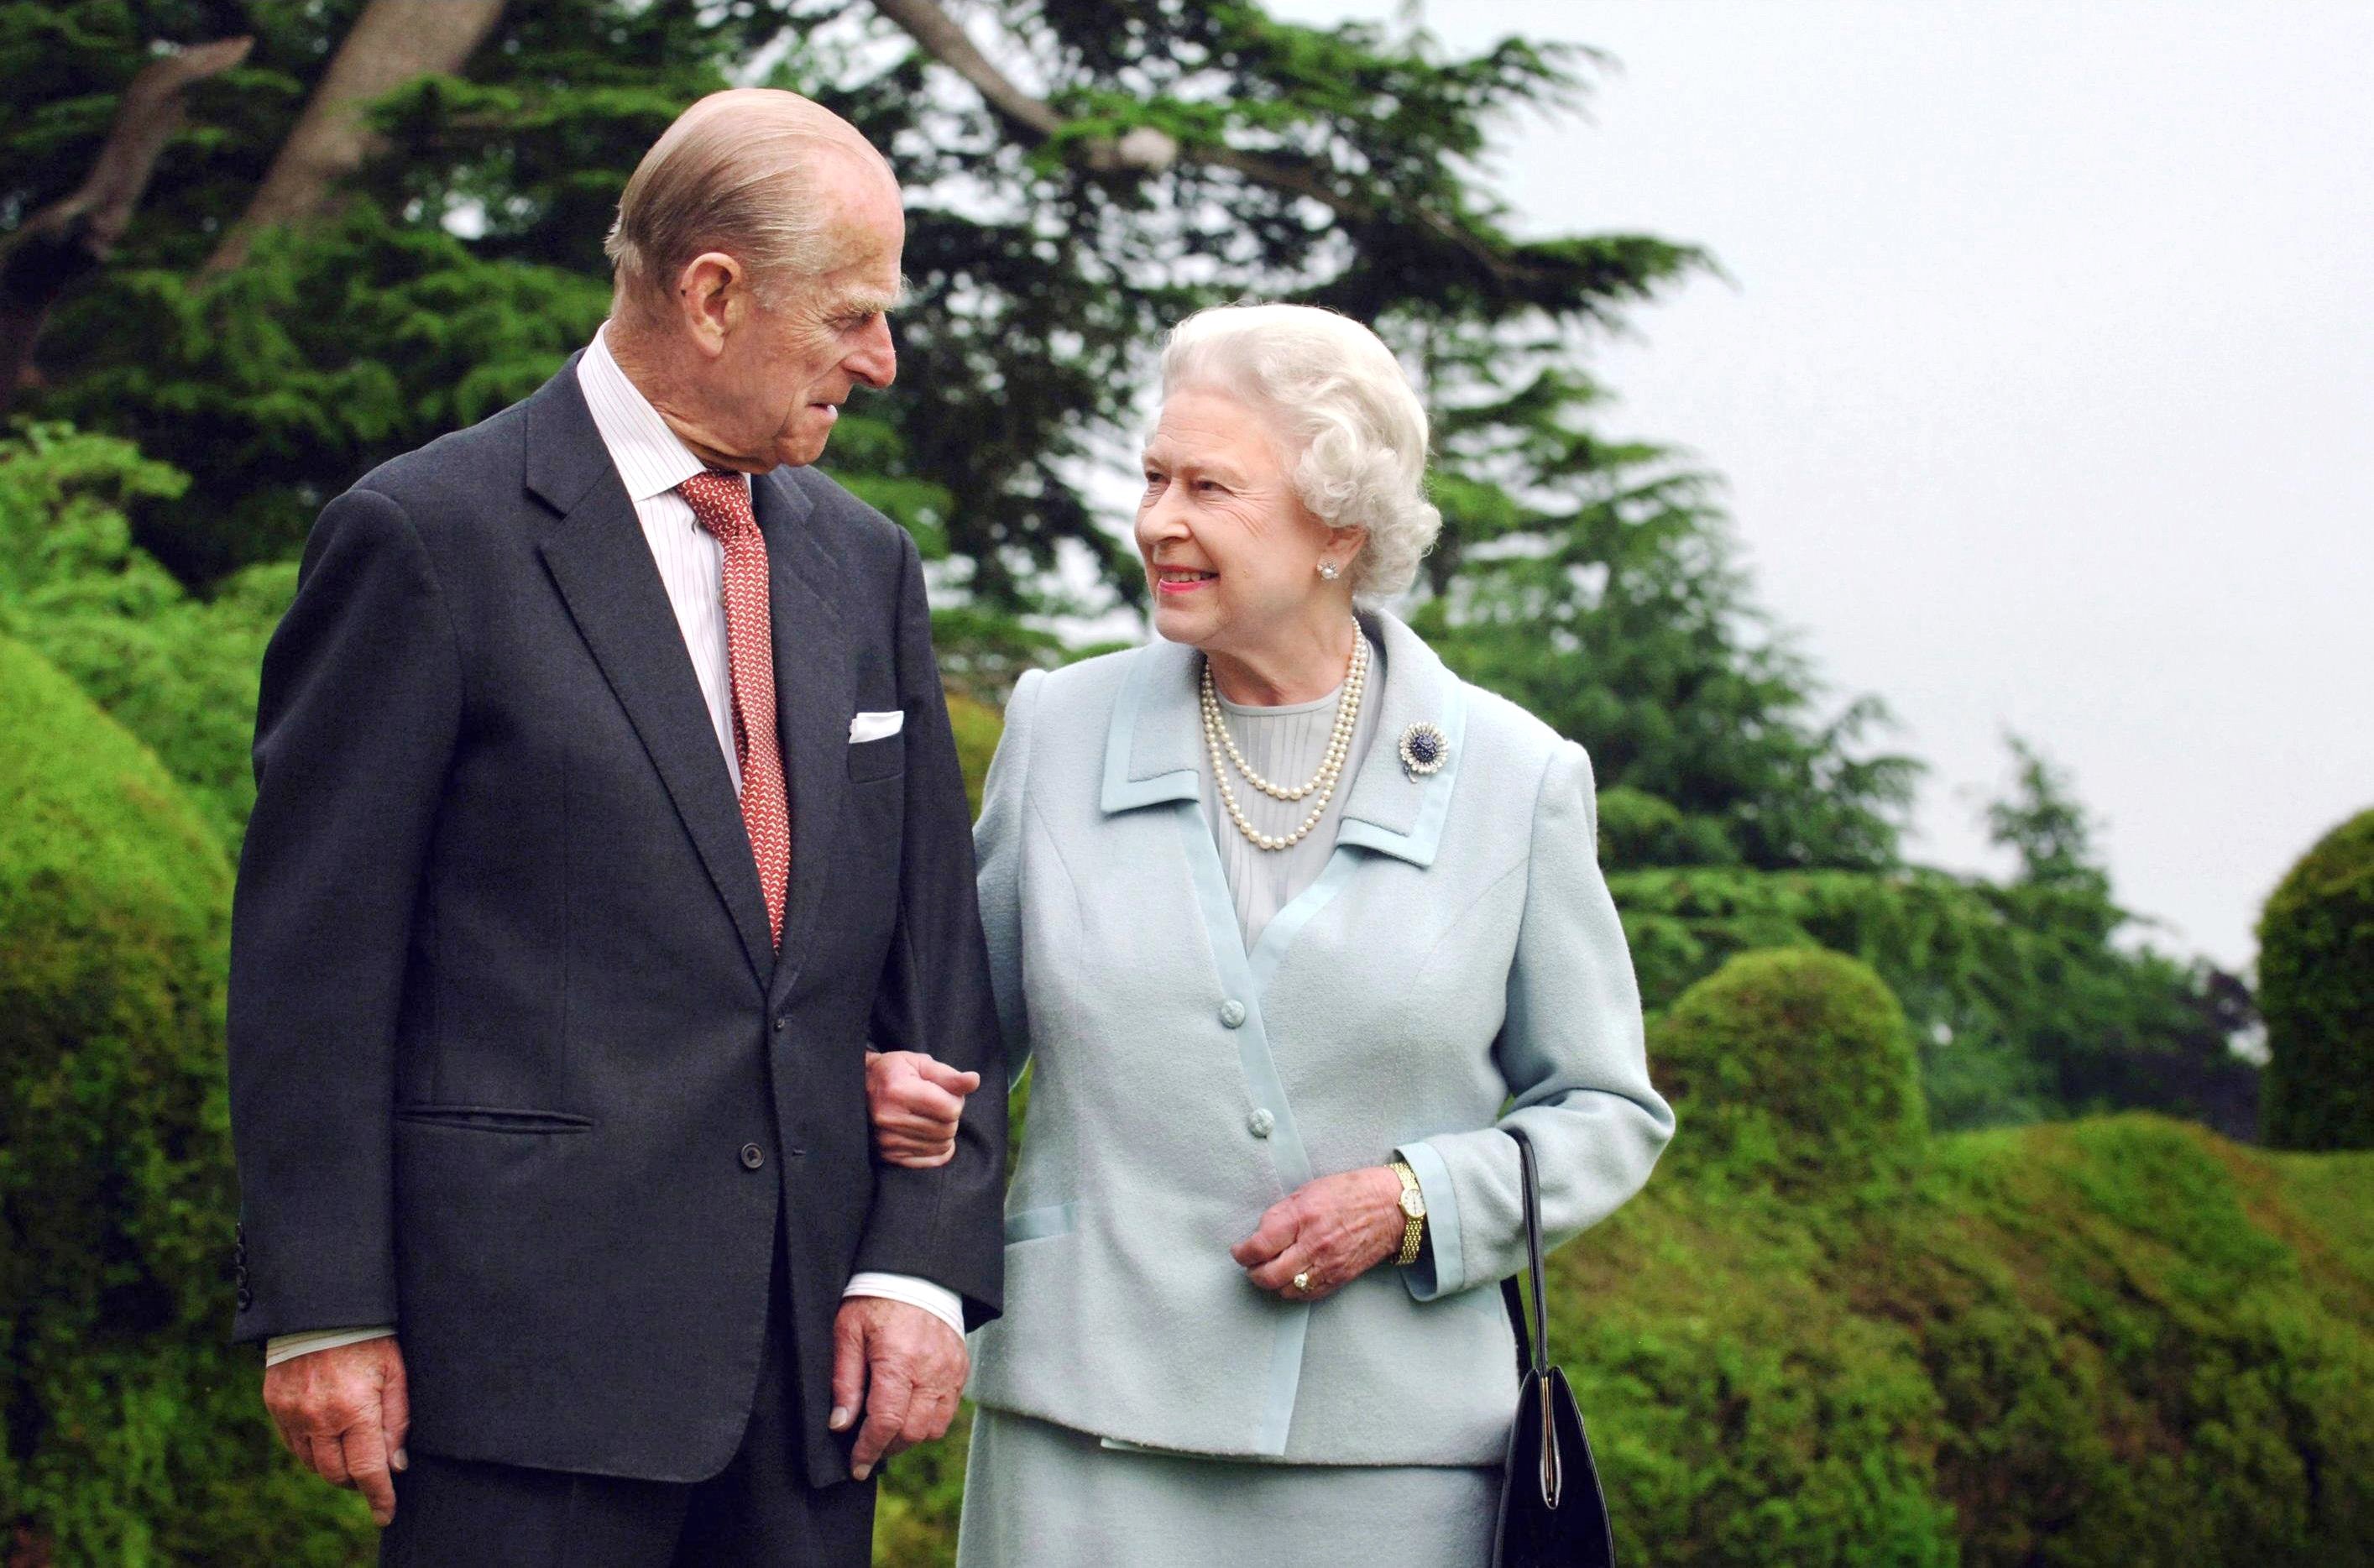 Queen Elizabeth II and Prince Philip walking arm-in-arm in the same spot they did on their honeymoon 60 years earlier